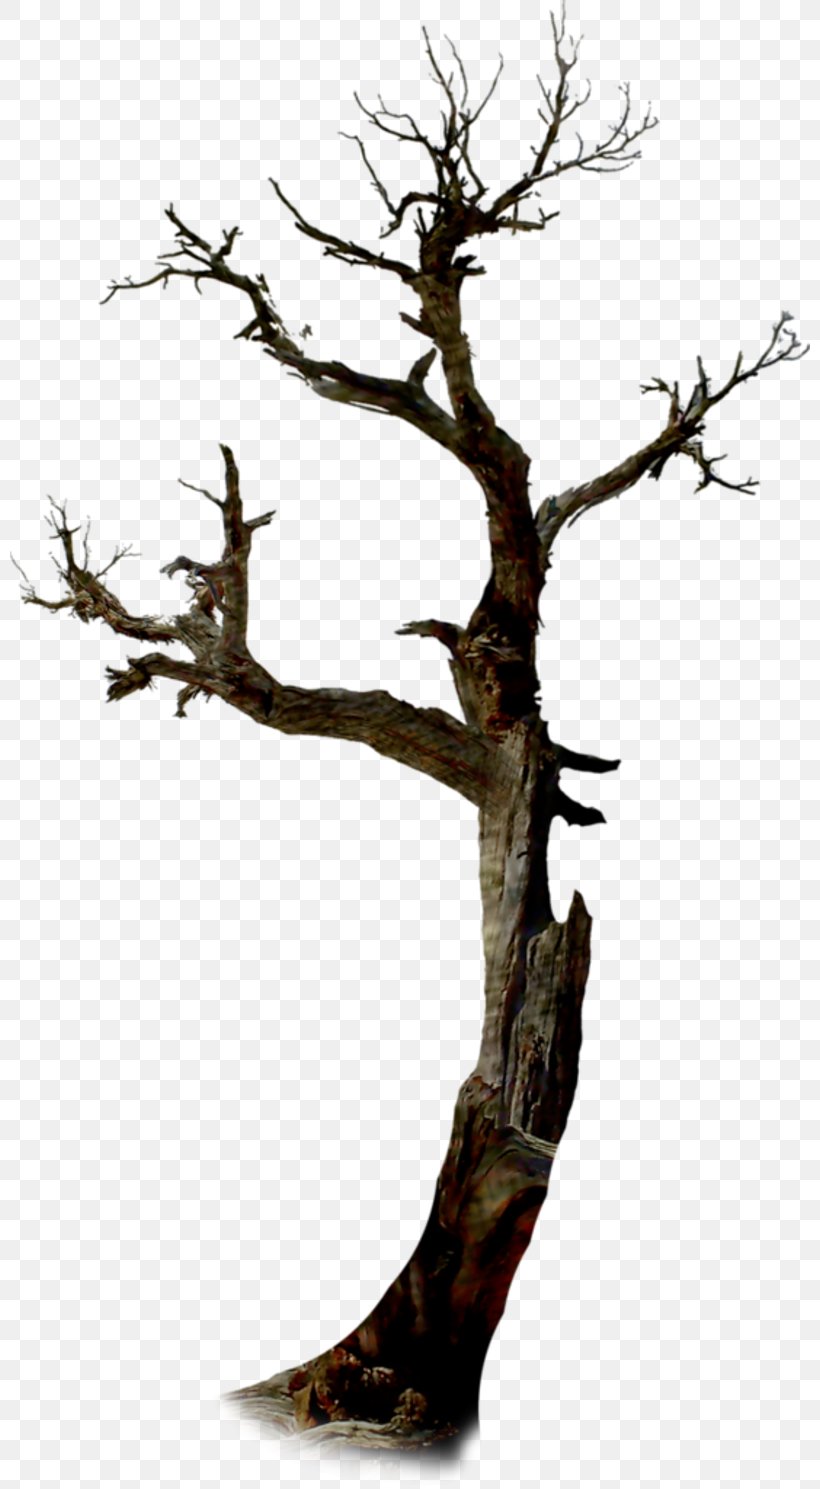 Twig The Halloween Tree Clip Art, PNG, 800x1489px, Twig, Bonsai, Branch, Halloween, Halloween Tree Download Free